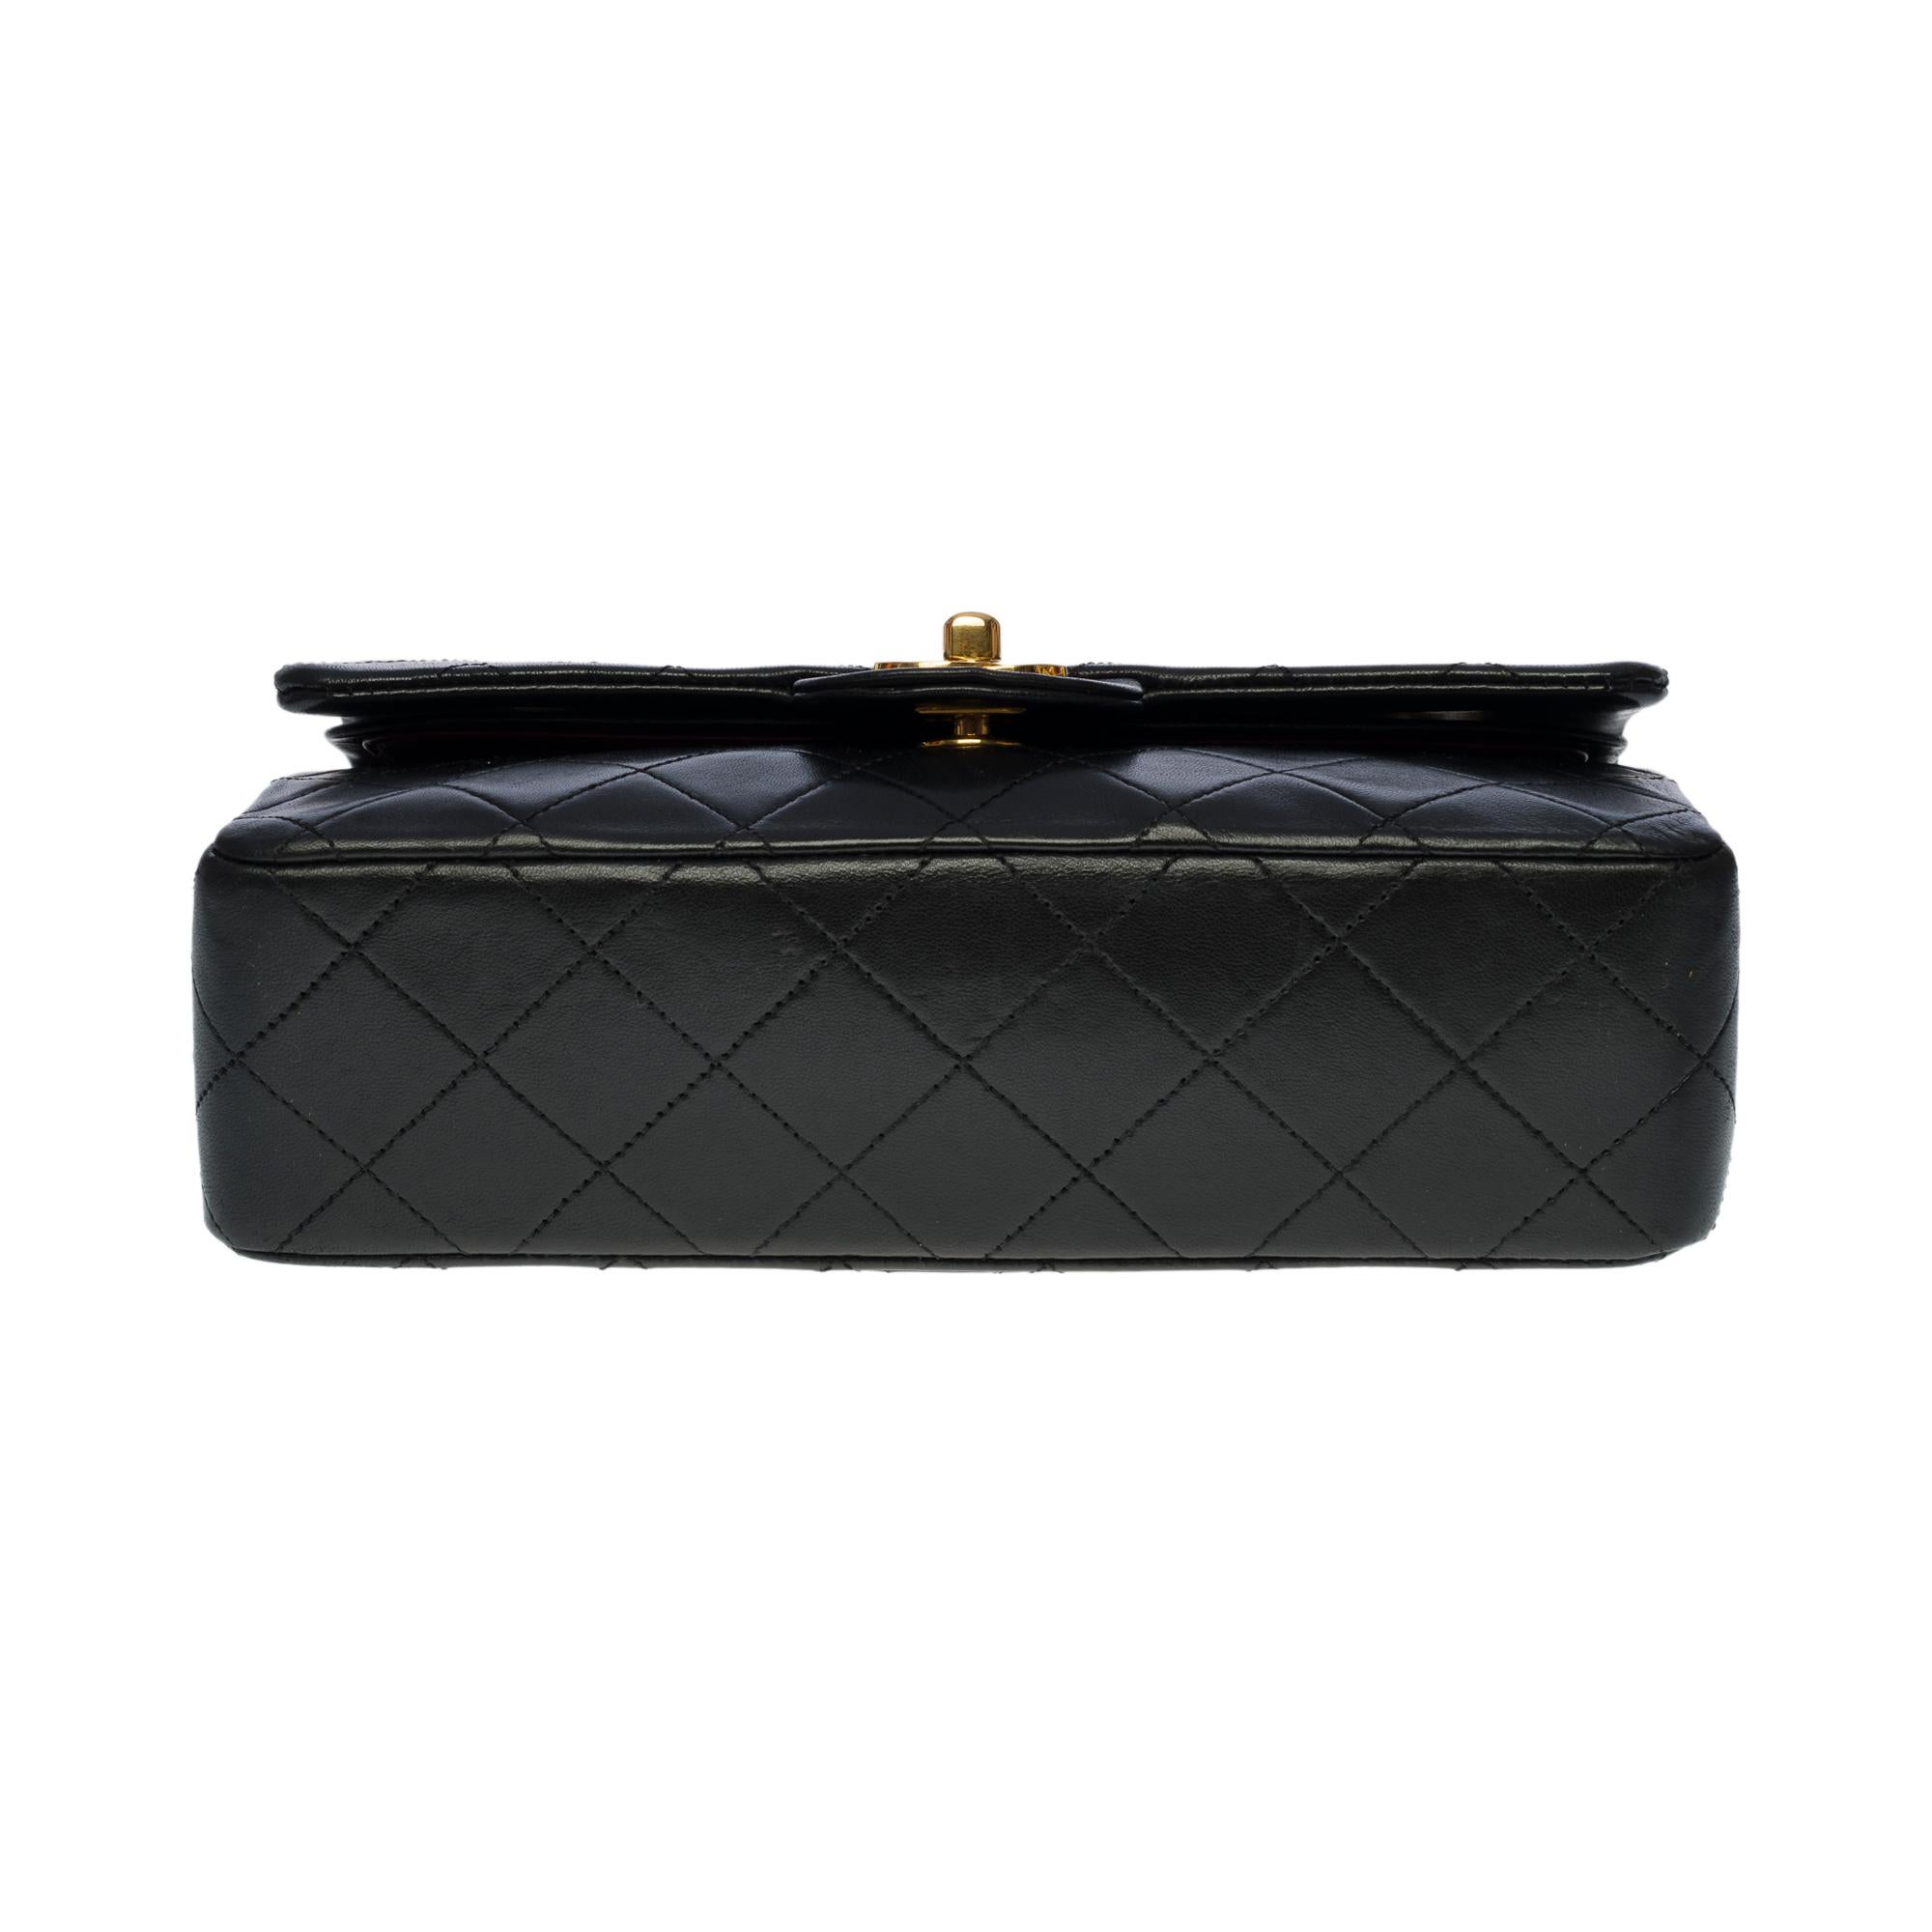 Chanel Coco Timeless 23cm double flap shoulder bag in black quilted lambskin, GHW 1